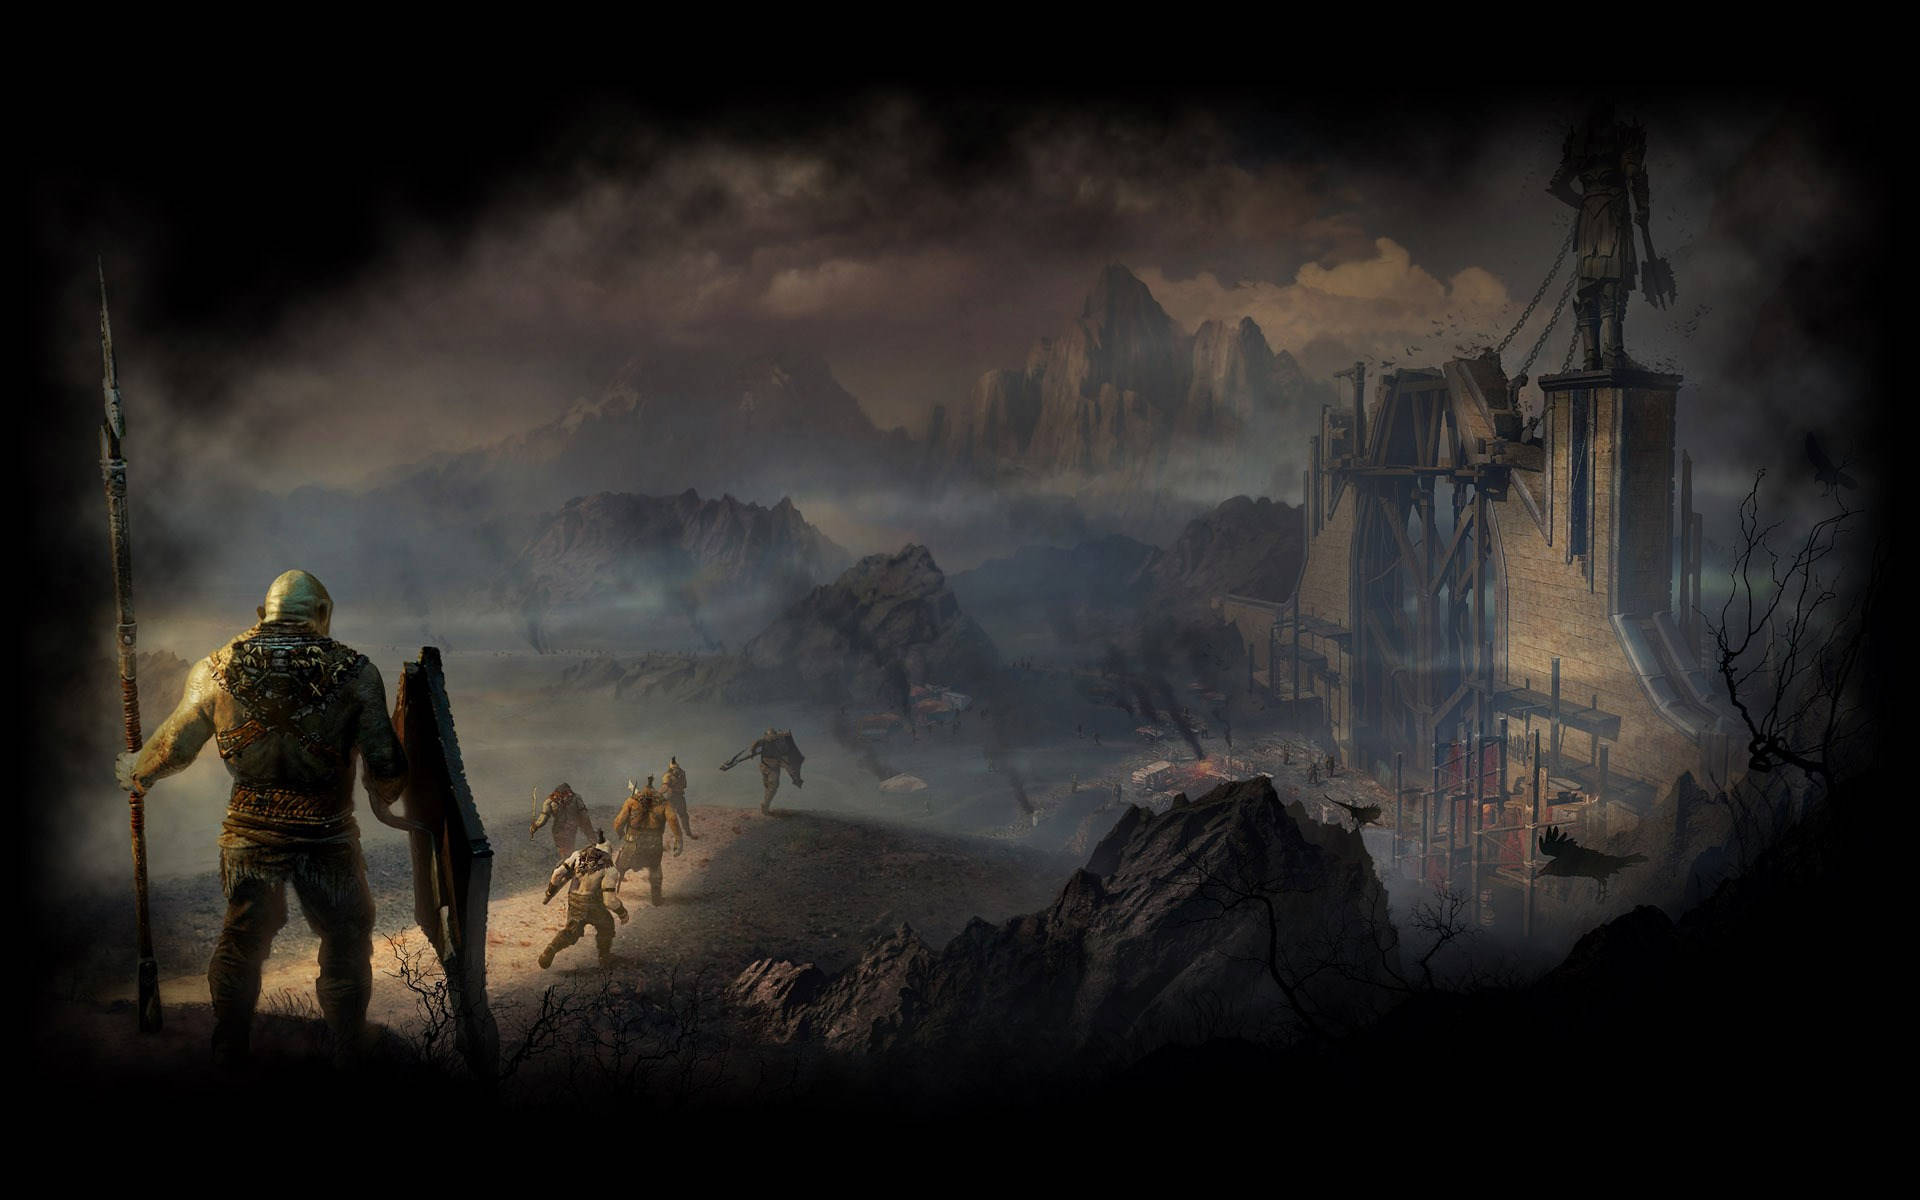 "Crush Sauron's armies and reclaim Middle-earth: Shadow of Mordor" Wallpaper